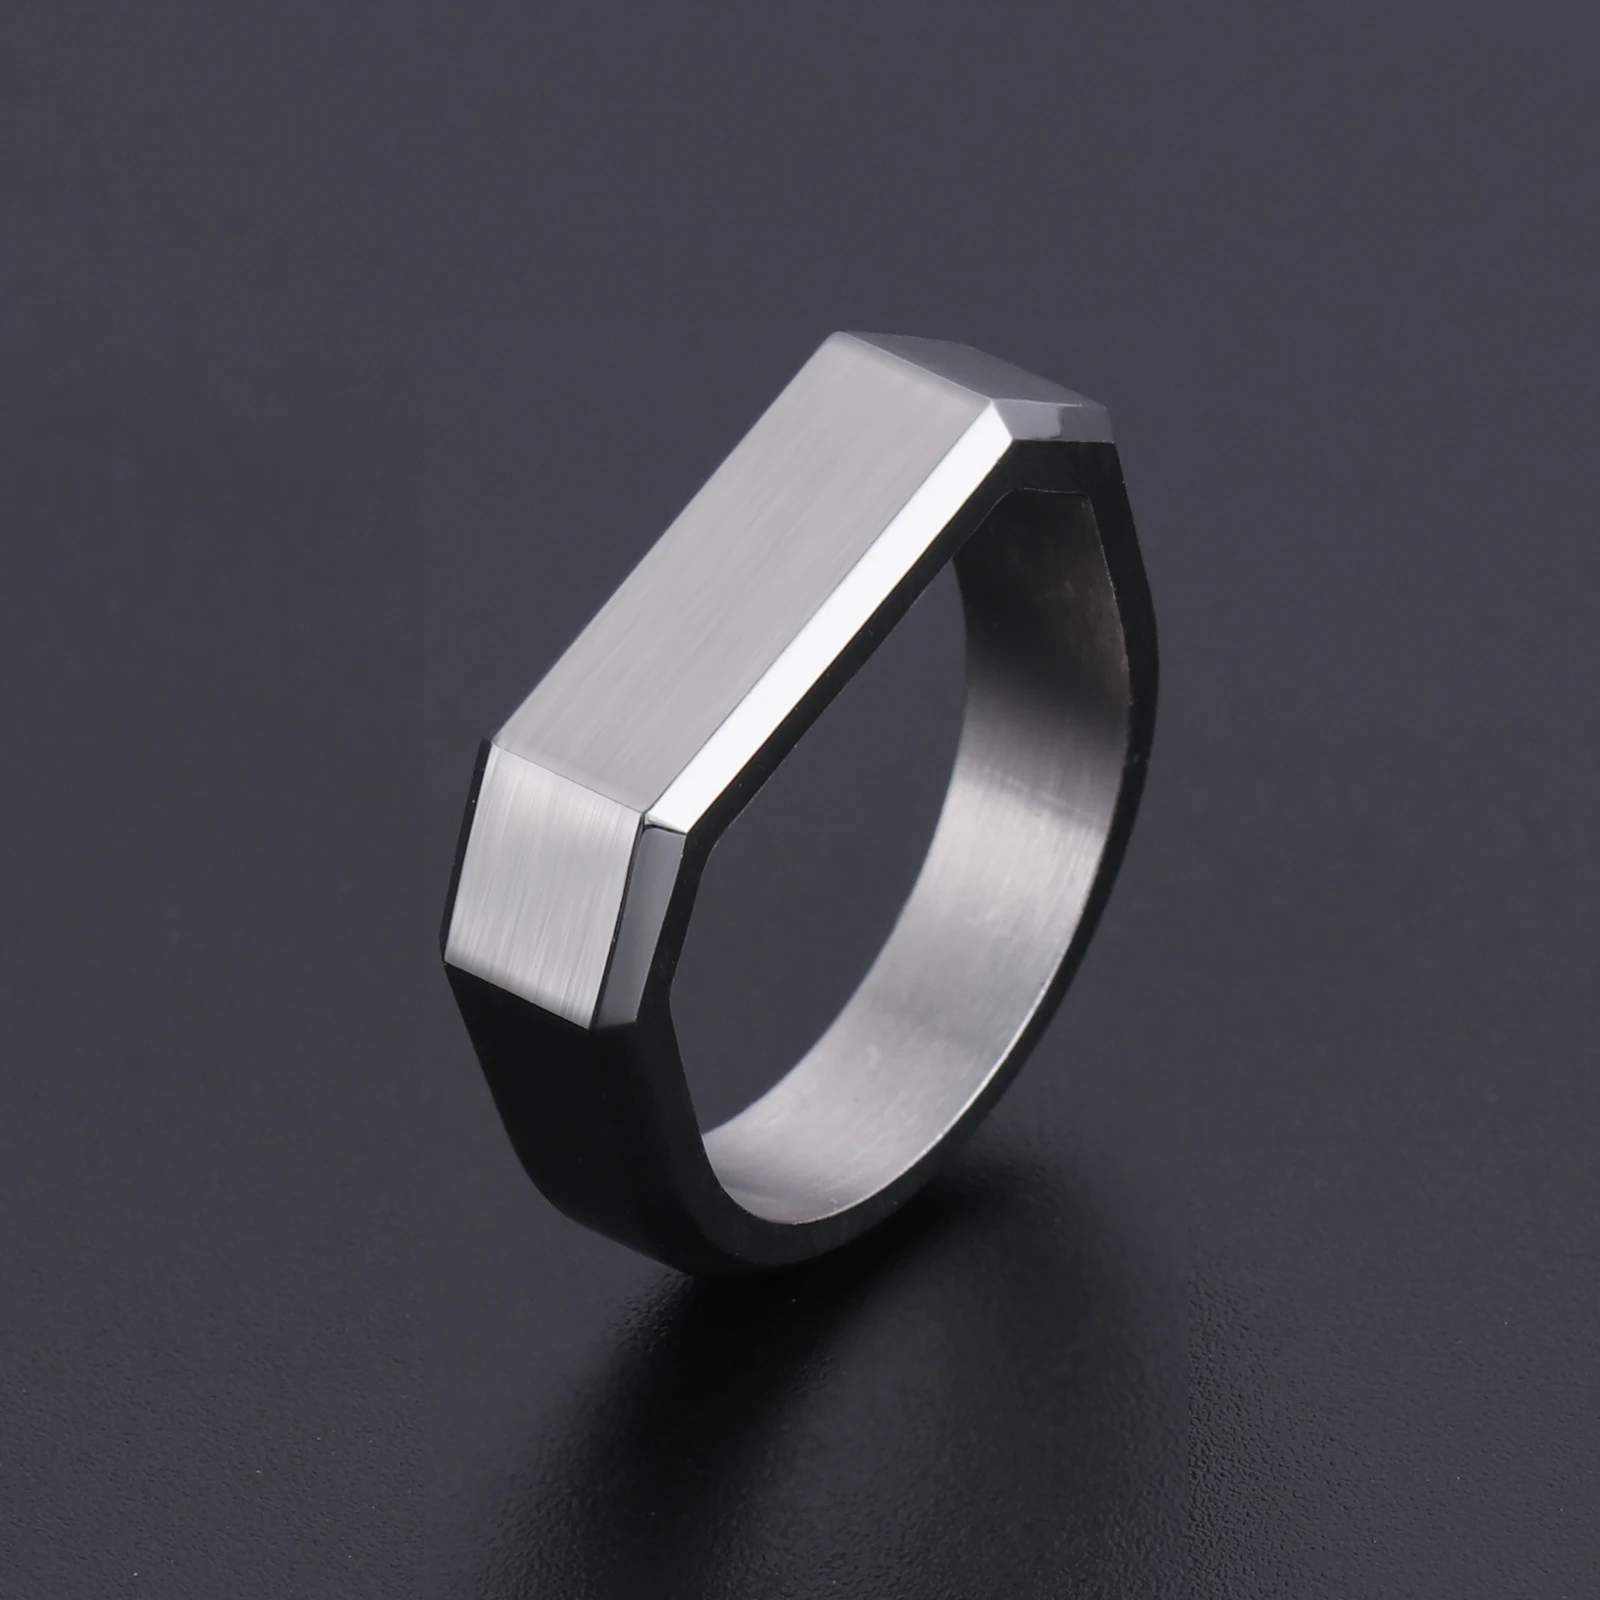 

Engraved Stainless Steel Jewelry Minimal Mens Customised Shaped Design Word Logo Name Geometric Minimalist Custom Ring, Picture shows